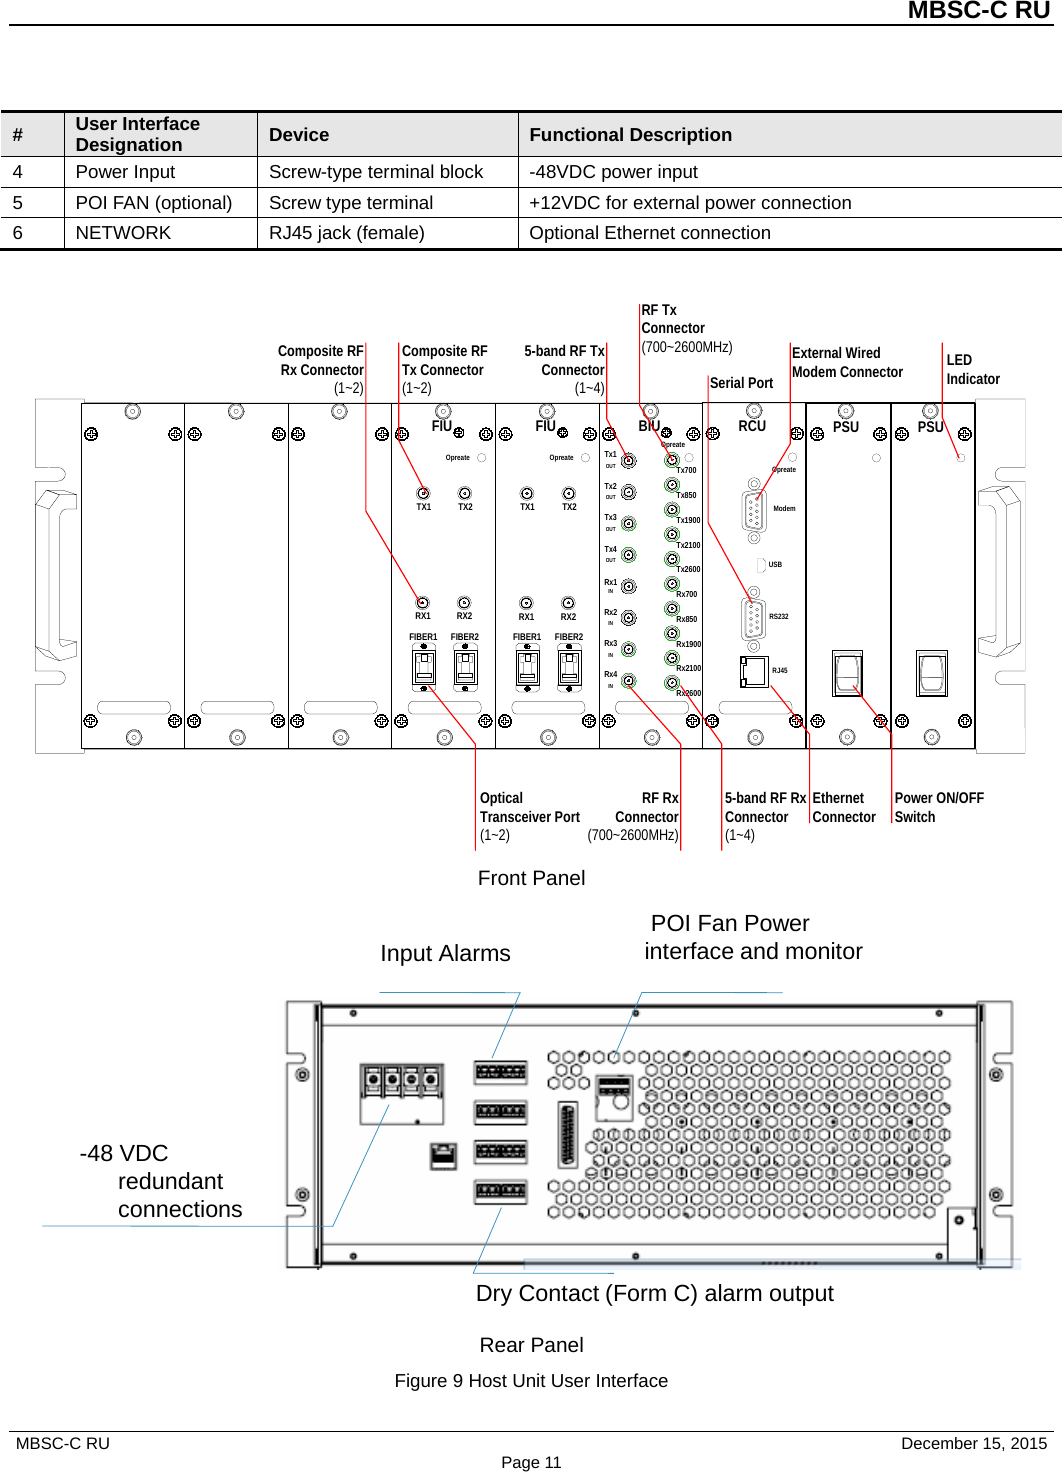          MBSC-C RU   MBSC-C RU                                     December 15, 2015 Page 11 # User Interface Designation Device Functional Description 4  Power Input  Screw-type terminal block  -48VDC power input 5  POI FAN (optional) Screw type terminal +12VDC for external power connection 6  NETWORK RJ45 jack (female)  Optional Ethernet connection  PSU10PSU10FIUOpreateFIBER2TX2RX2FIBER1TX1RX1FIUOpreateFIBER2TX2RX2FIBER1TX1RX1BIUOpreateTx700Rx4INRx3INRx2INRx1INTx4OUTTx3OUTTx2OUTTx1OUTTx850Tx1900Tx2100Tx2600Rx700Rx850Rx1900Rx2100Rx2600RCUOpreateRJ45RS232ModemUSBComposite RF Tx Connector(1~2)Composite RF Rx Connector(1~2)Optical Transceiver Port(1~2)LED IndicatorPower ON/OFF SwitchEthernet Connector5-band RF Tx Connector(1~4)RF Rx Connector(700~2600MHz)RF Tx Connector(700~2600MHz)5-band RF Rx Connector(1~4)Serial PortExternal Wired Modem Connector Front Panel -48 VDC redundant connectionsPOI Fan Power interface and monitorDry Contact (Form C) alarm outputInput Alarms Rear Panel Figure 9 Host Unit User Interface 